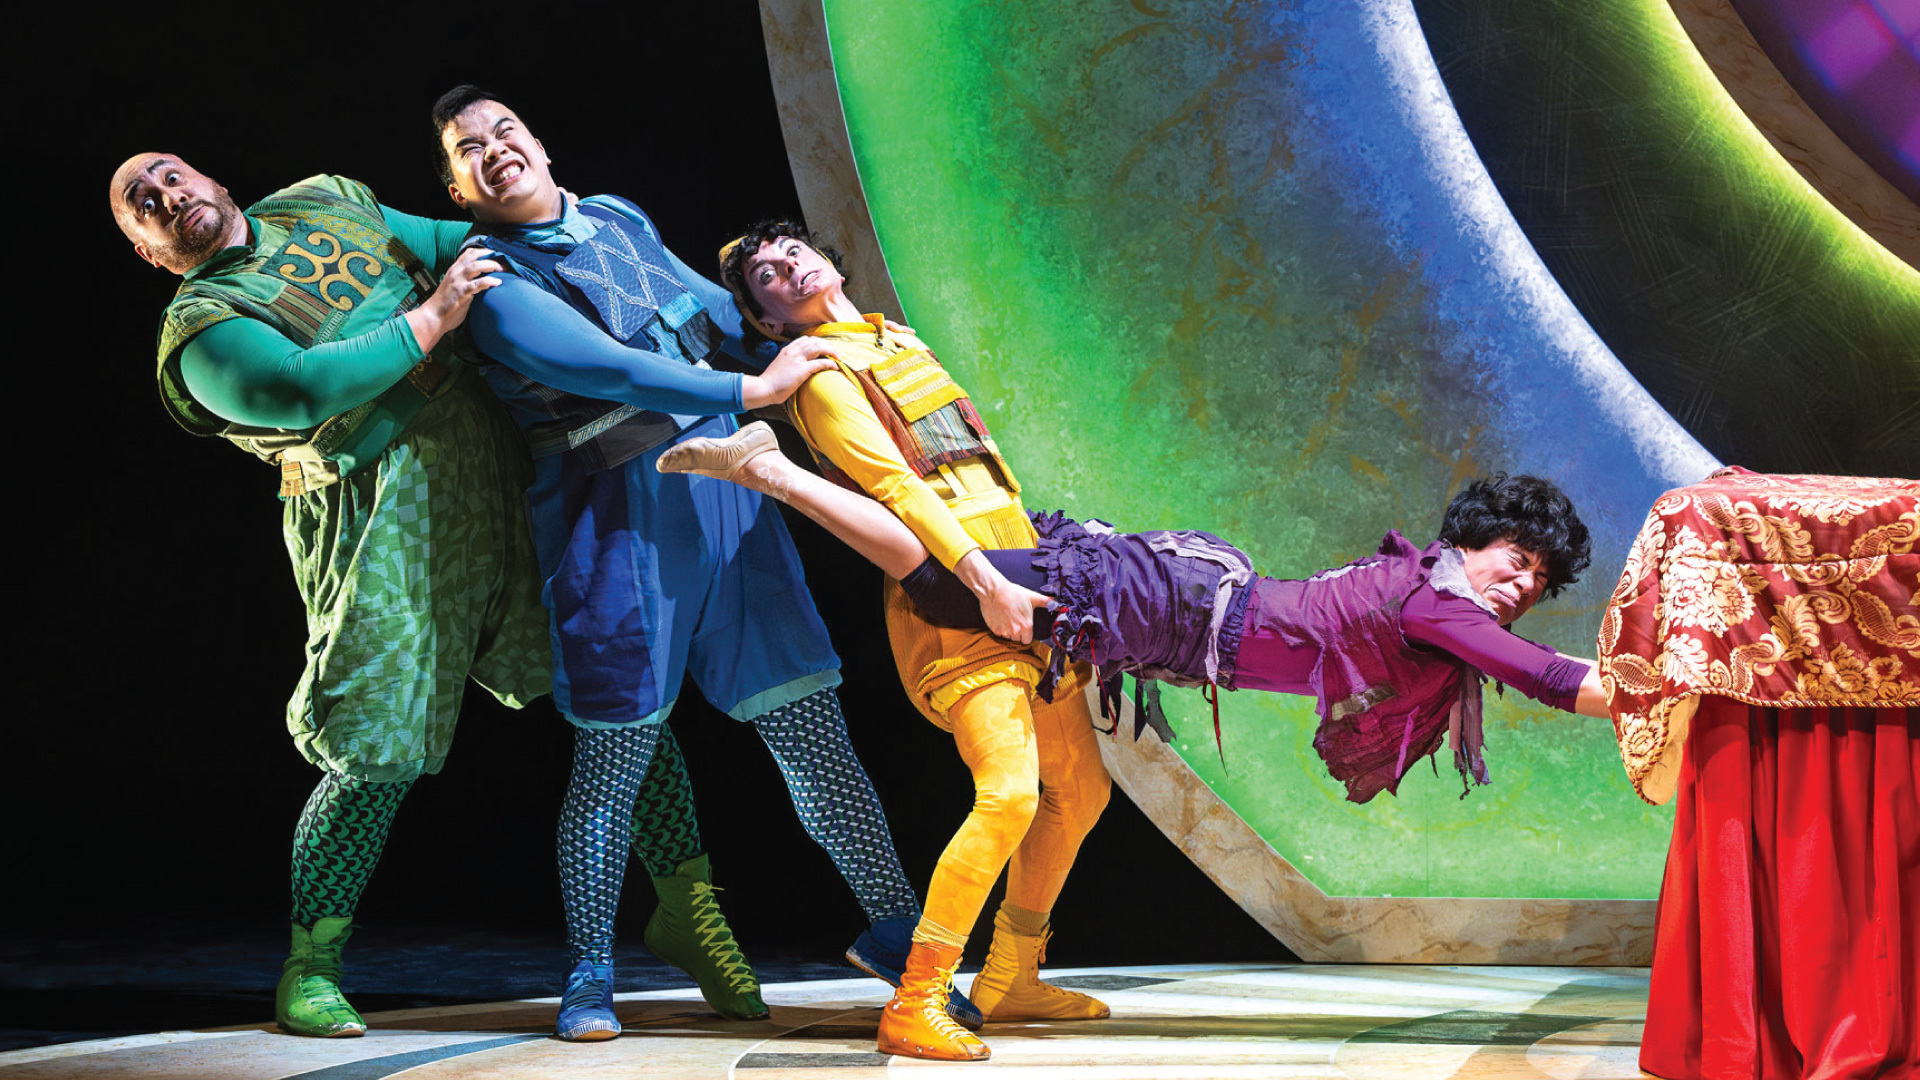 Three performers wearing green, blue and yellow clothes stand one in front of the other and work hard to pull a fourth performer wearing purple clothes away from the end of a bed.